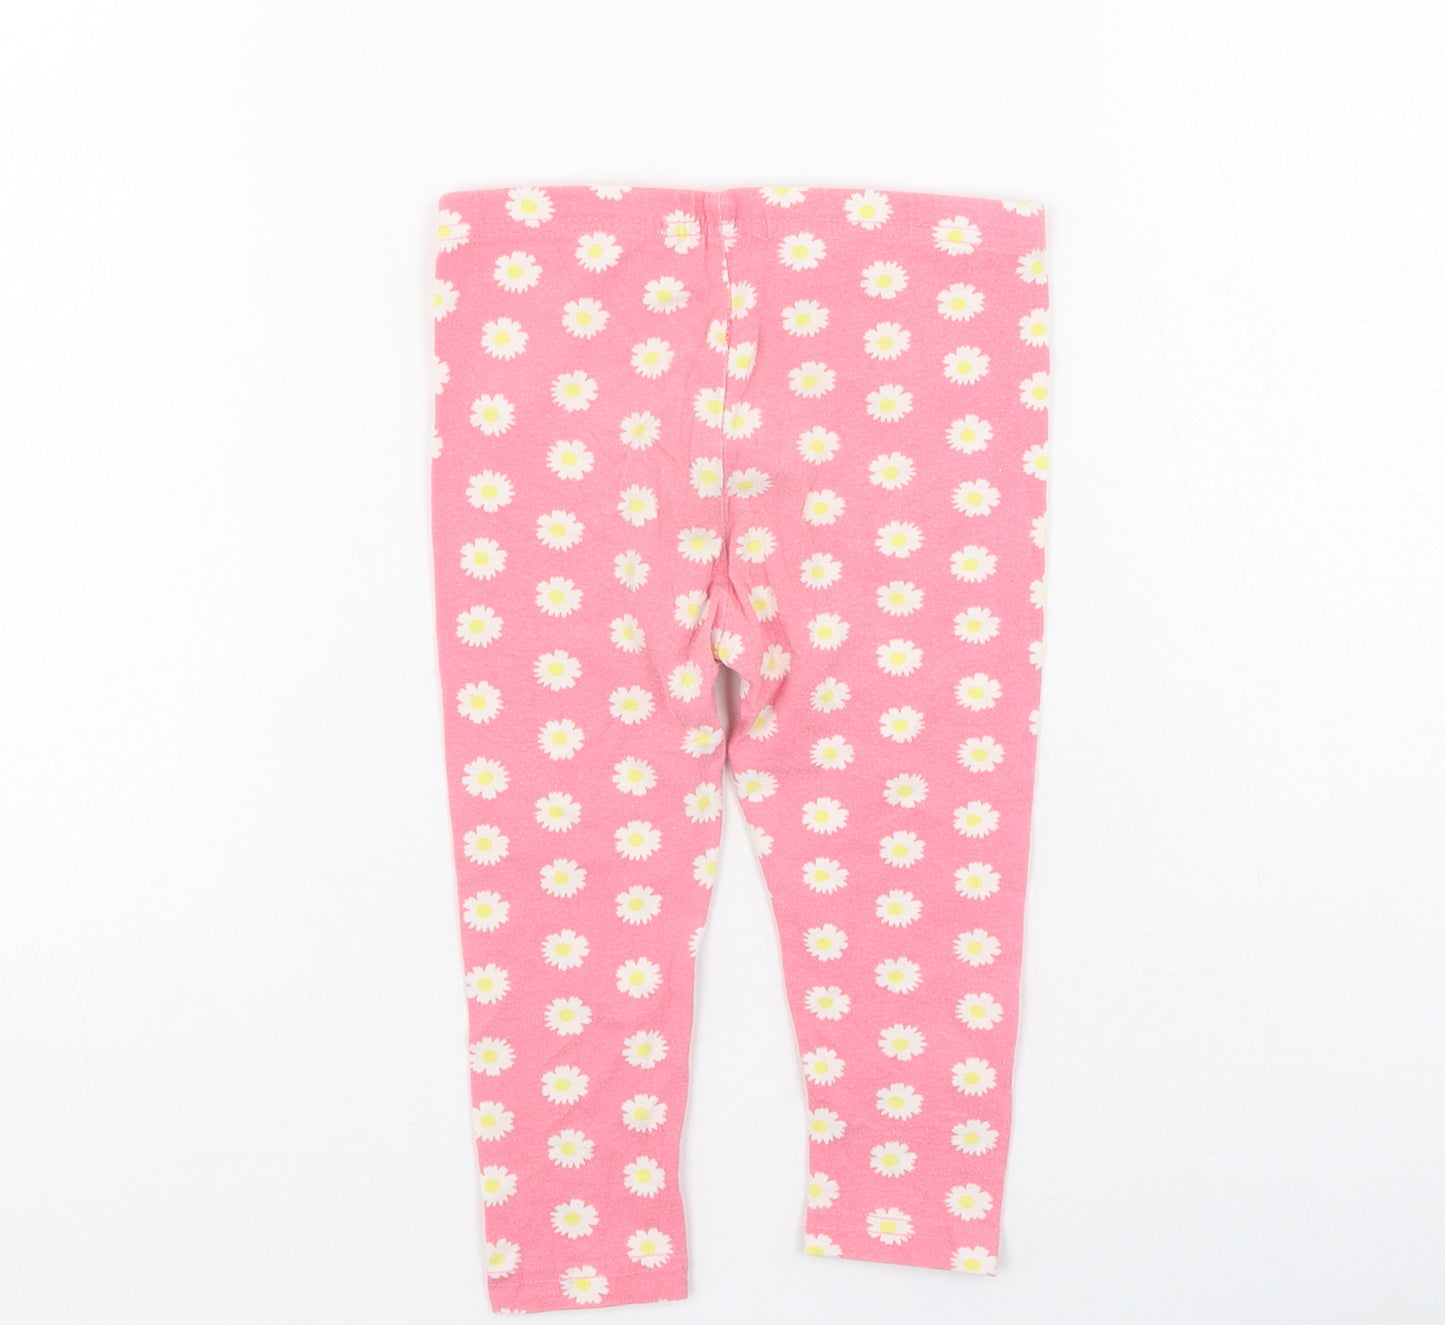 Young Dimension Girls Pink  Cotton Jegging Trousers Size 2-3 Years  Regular  - flowers